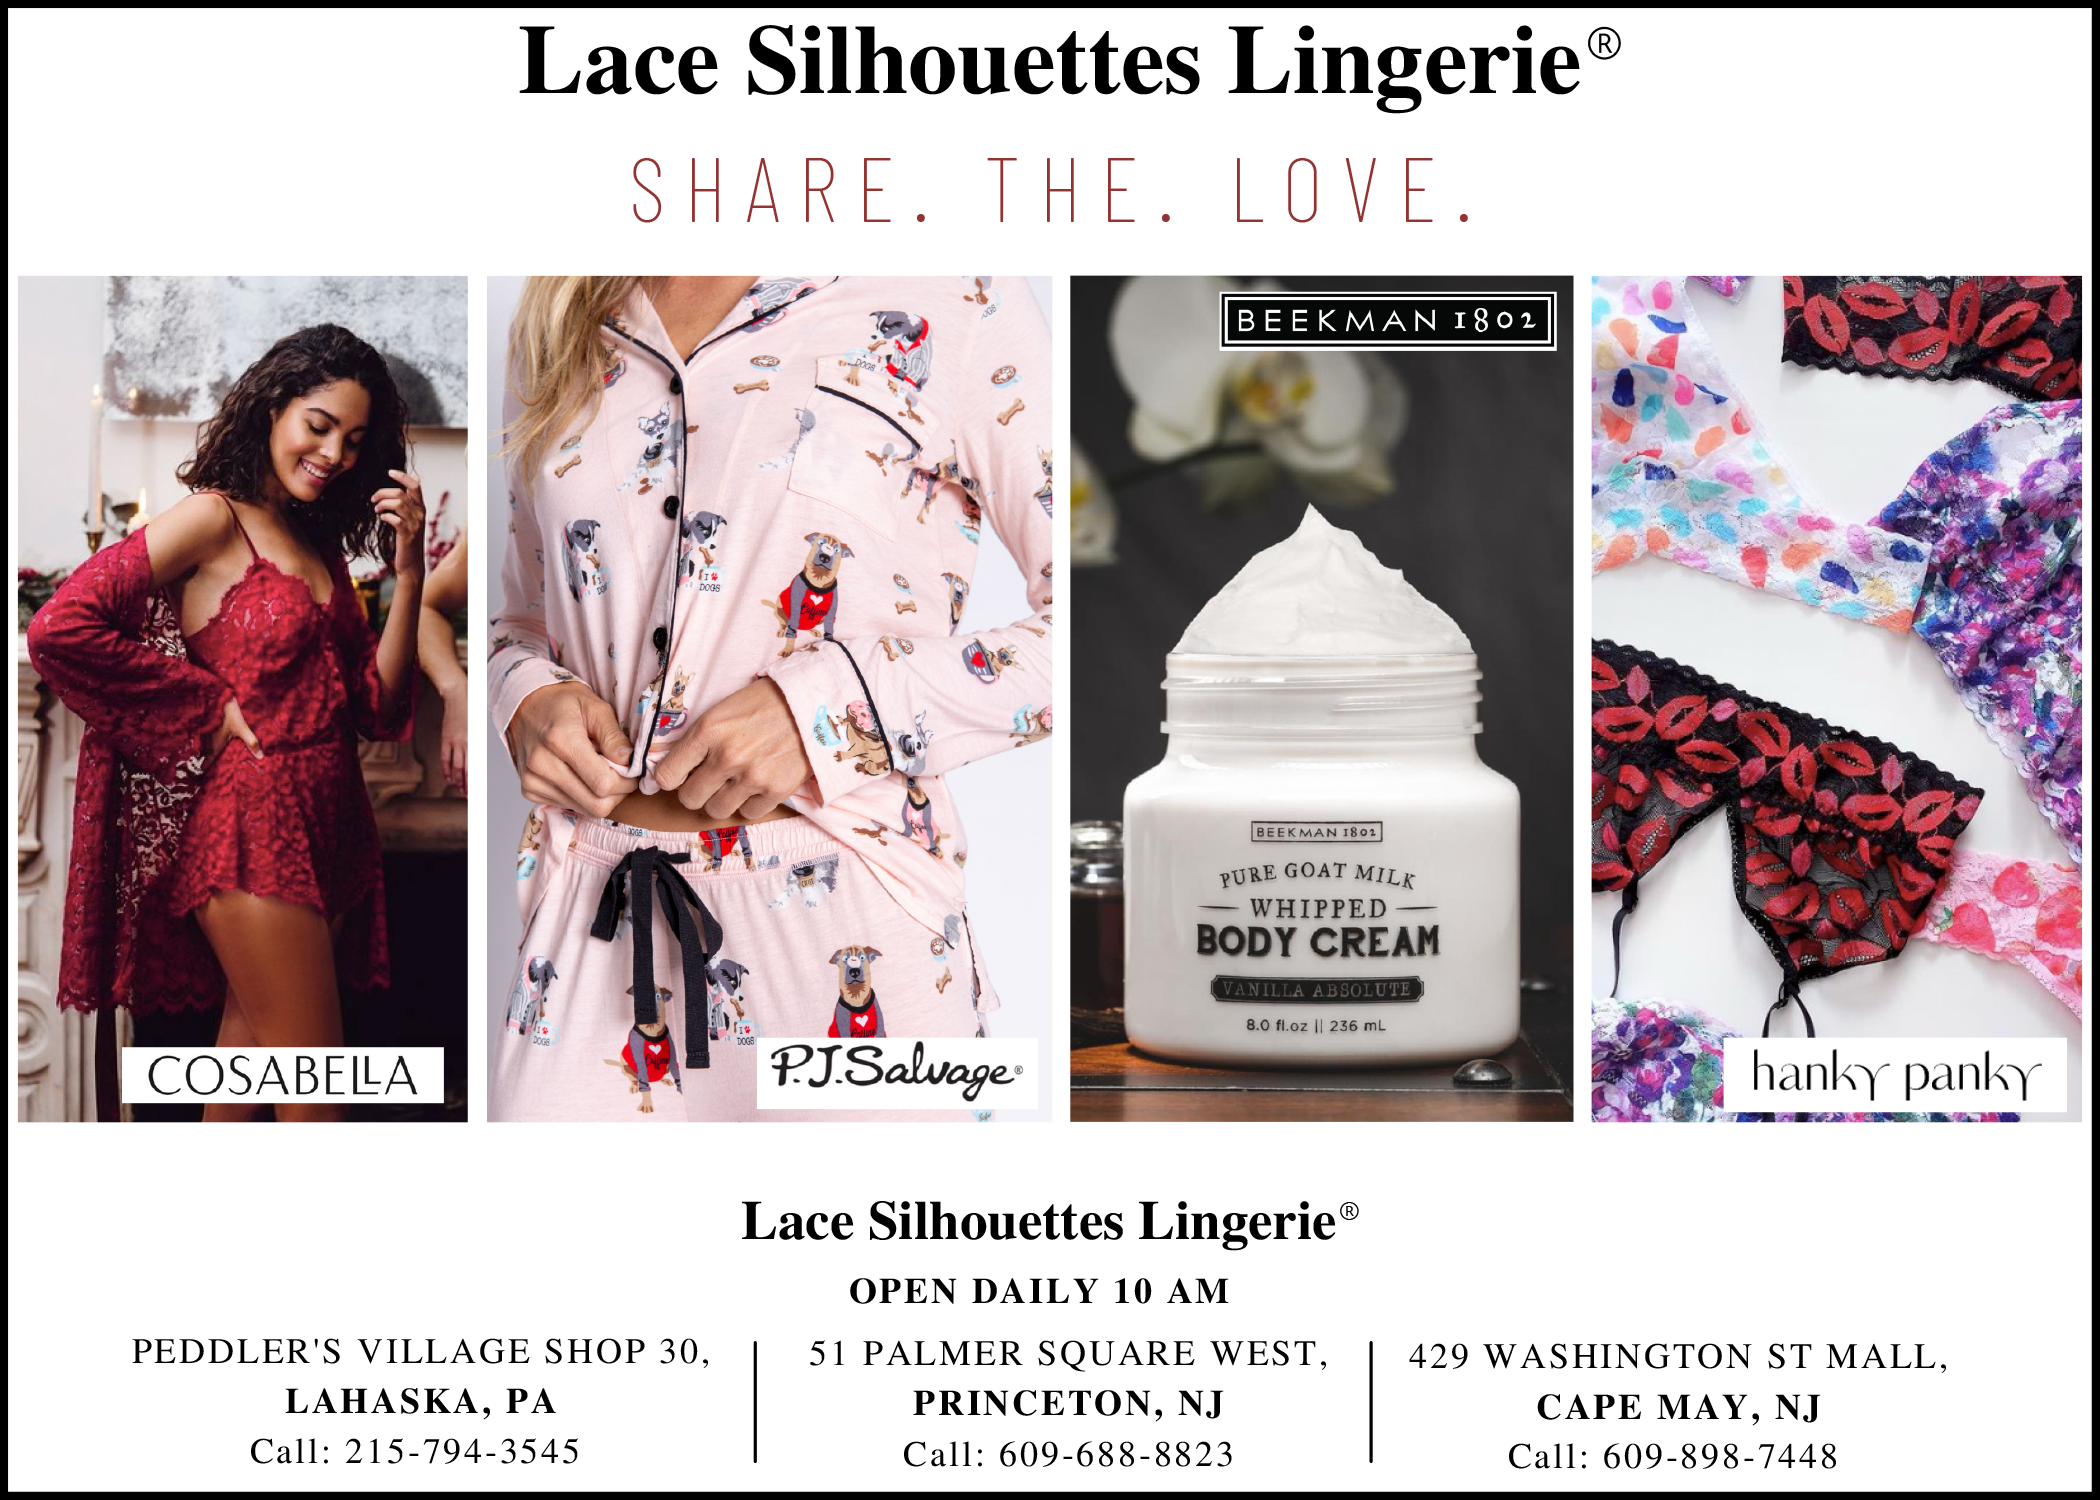 Lace Silhouettes Lingerie (@lacesilhouettes) • Instagram photos and videos